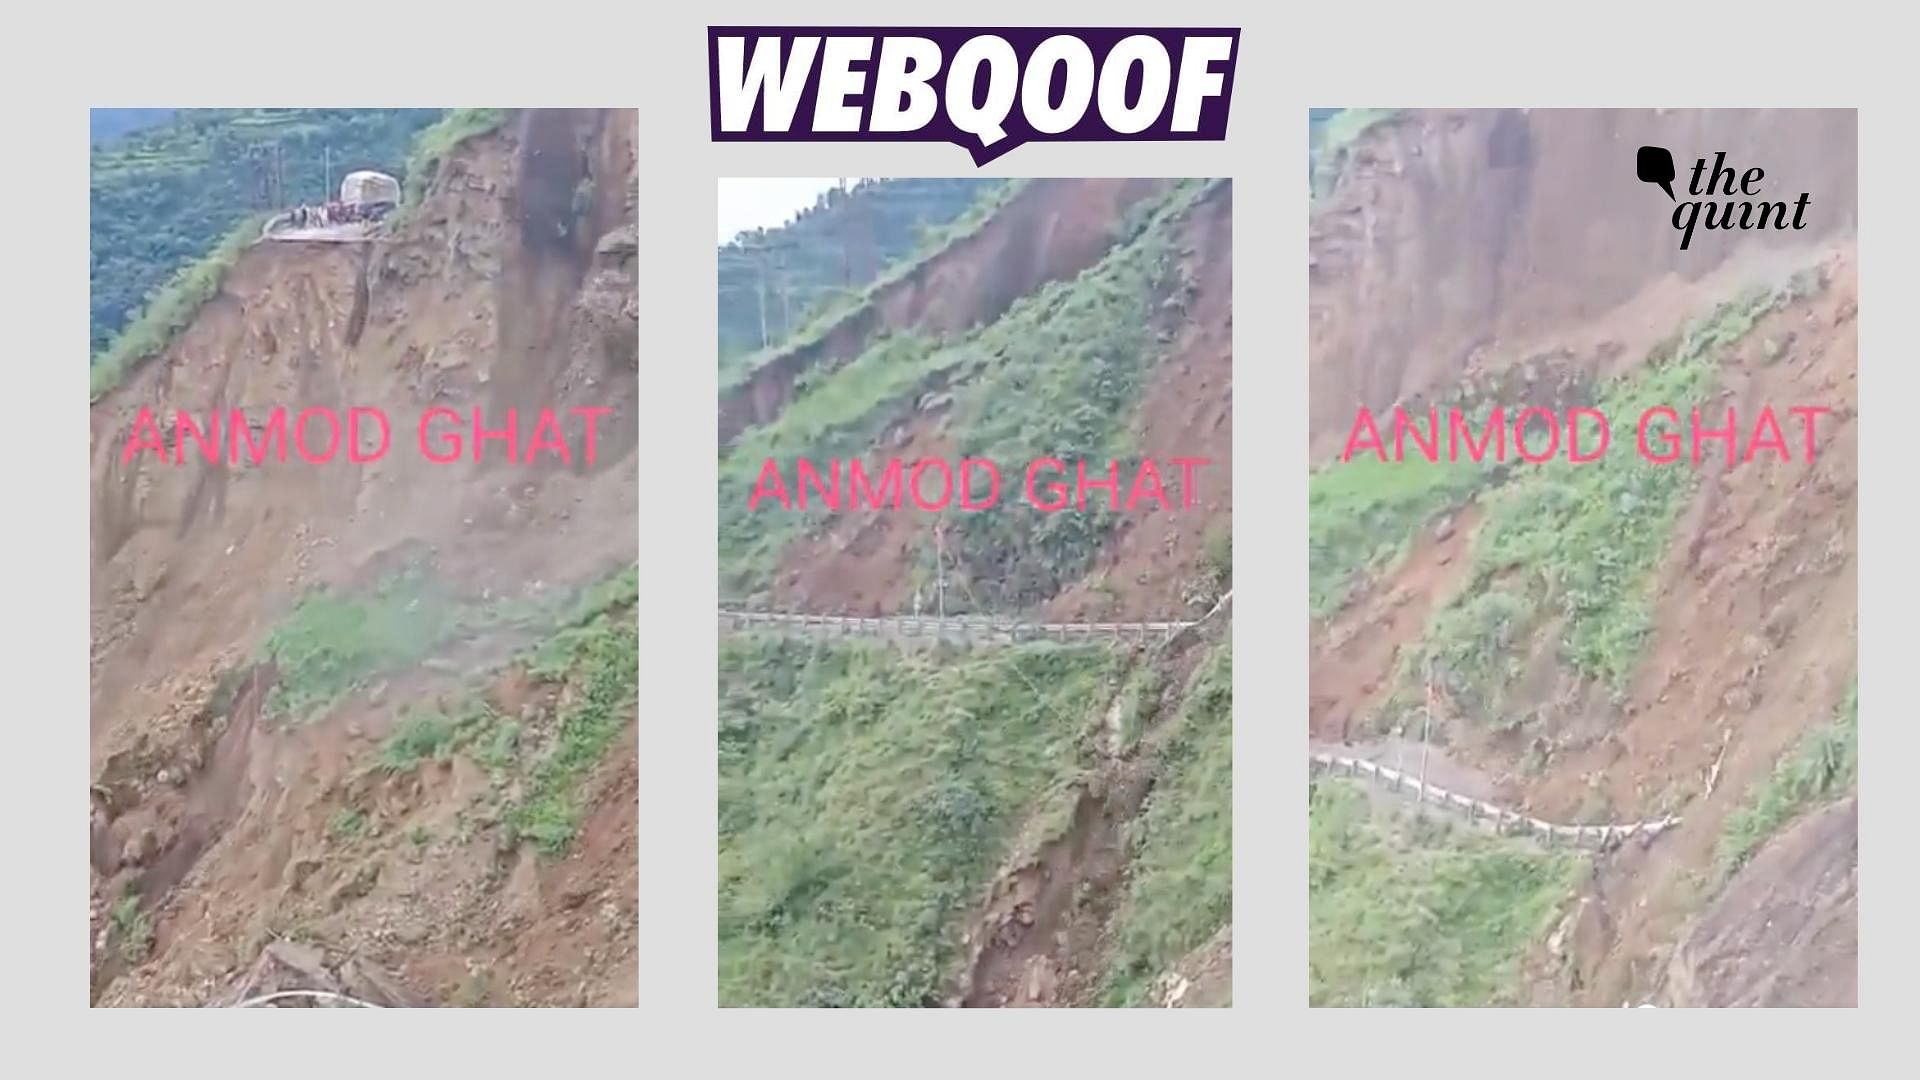 <div class="paragraphs"><p>The claim states that the video shows visuals of landslide from Anmod Ghat in Goa.&nbsp;</p></div>